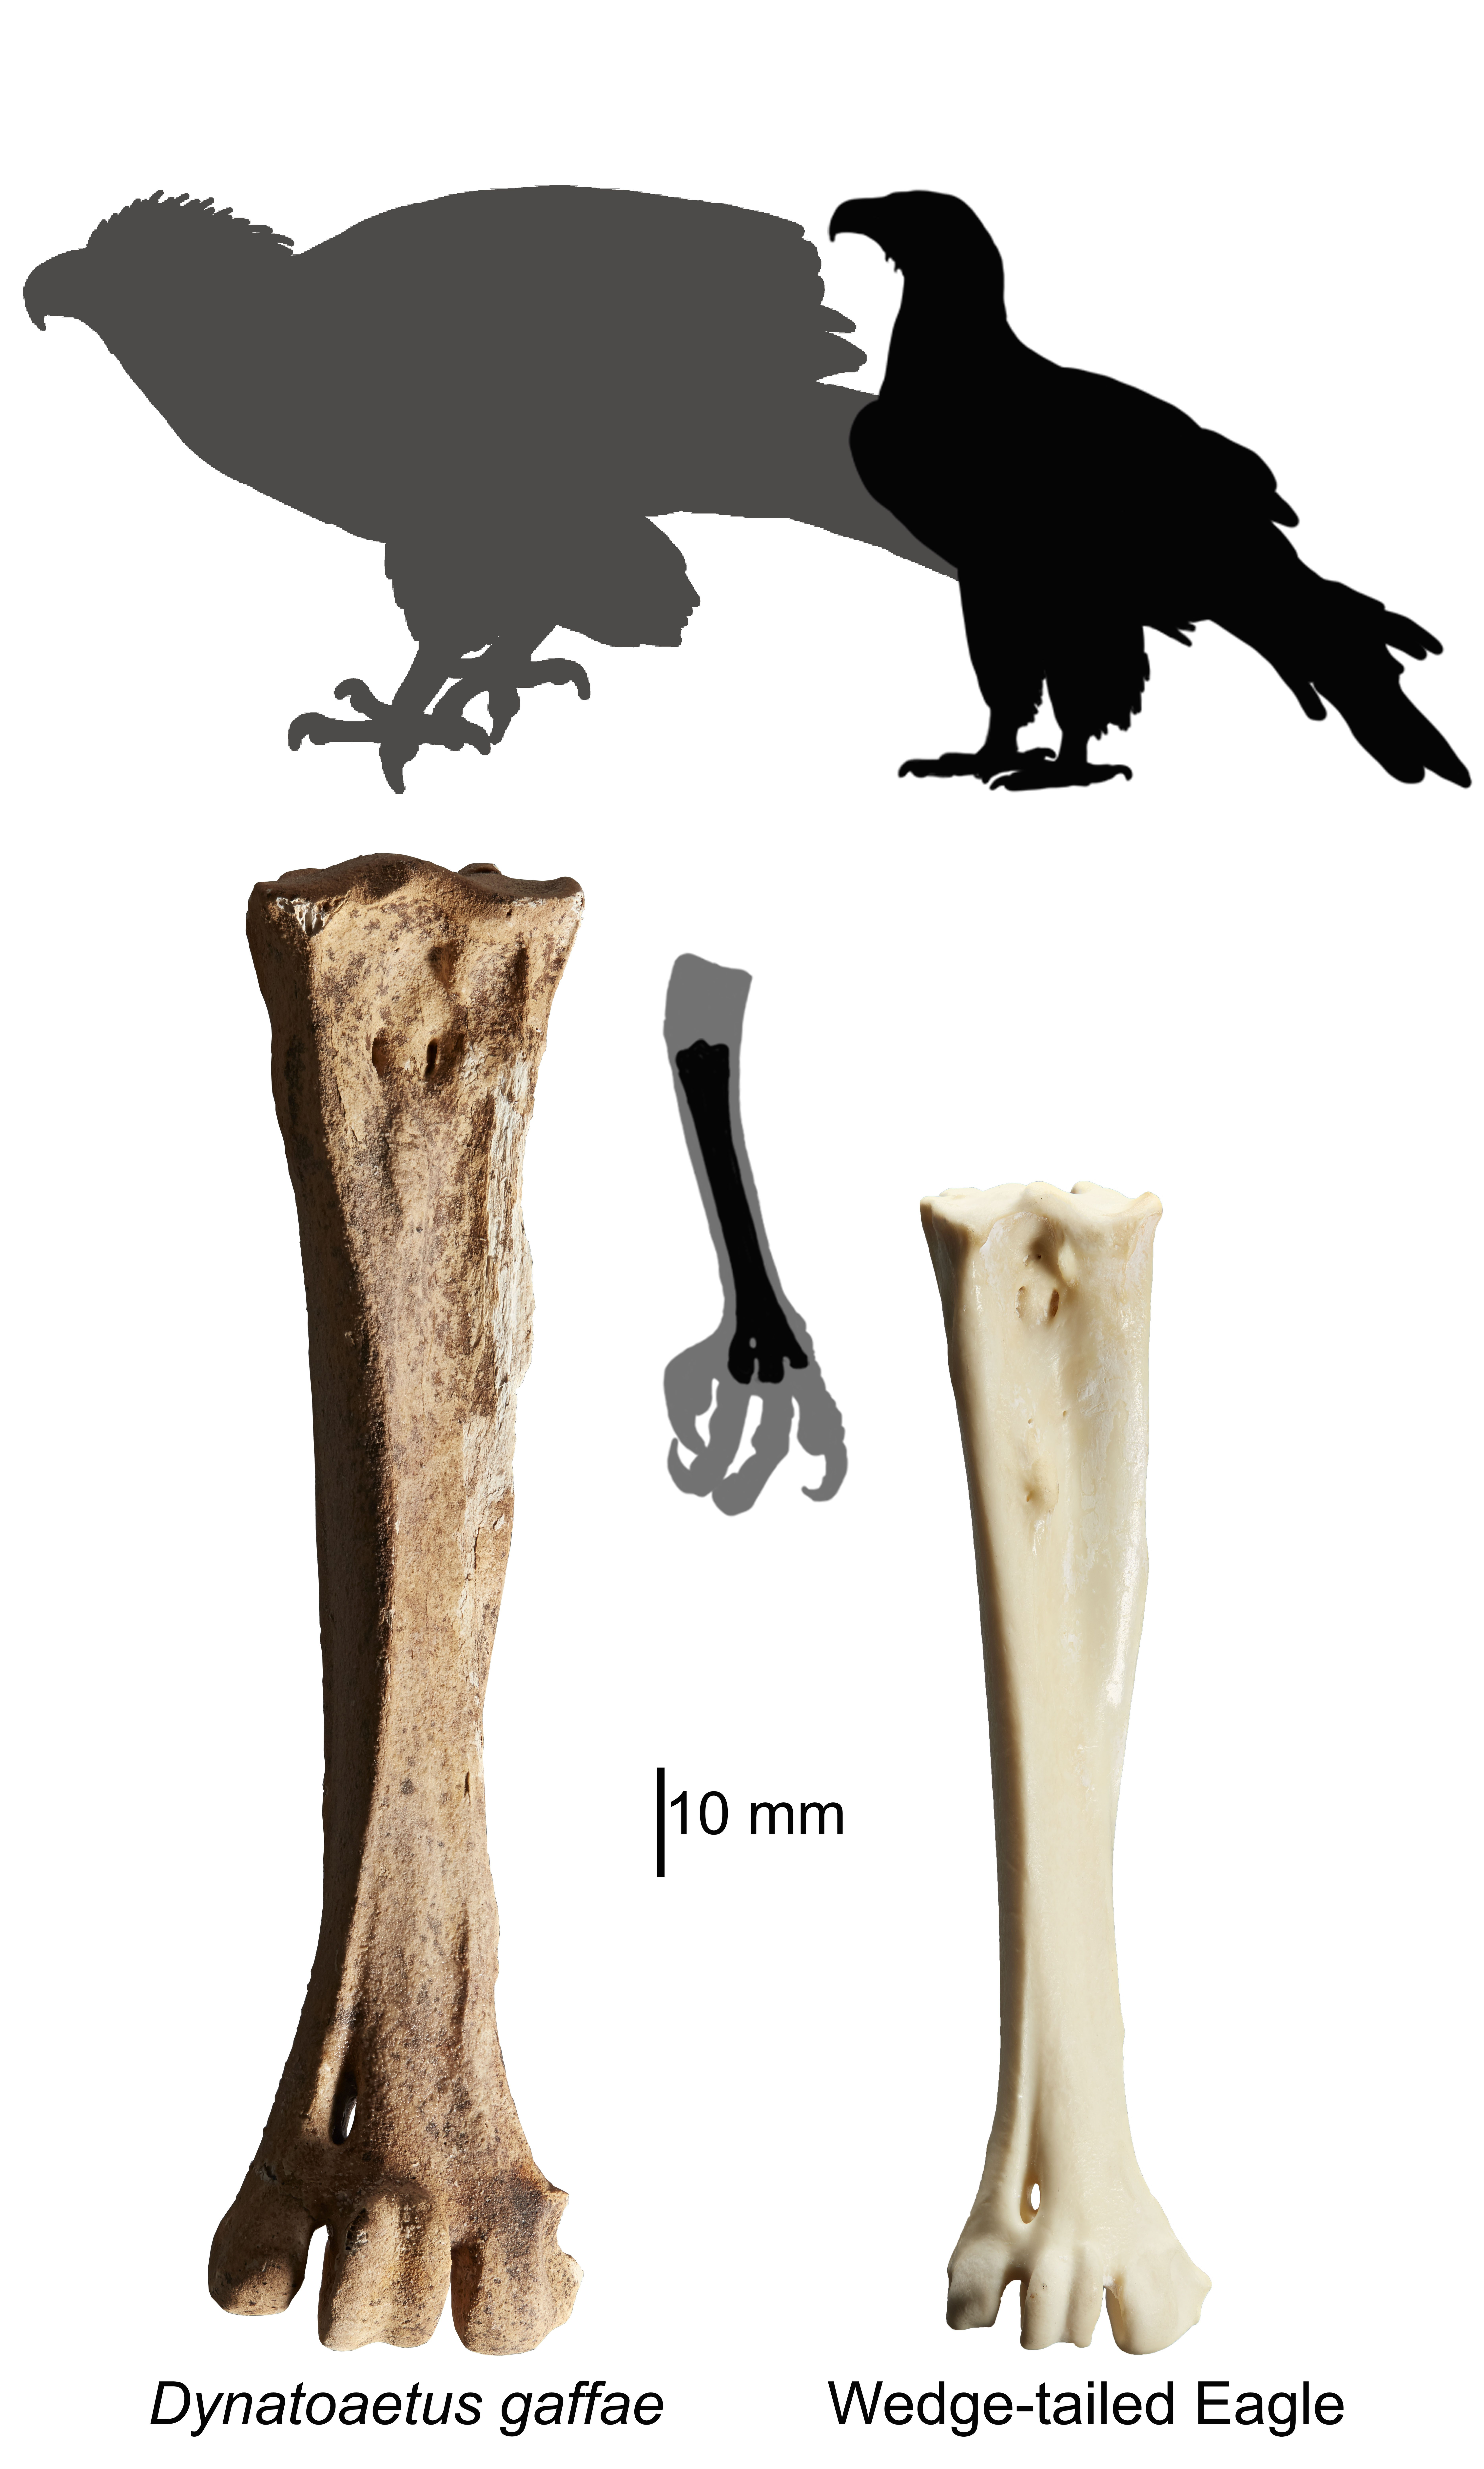 Comparison between Wedge Tailed Eagle and Gaff's Powerful Eagle, showing leg bones and silhouettes. 